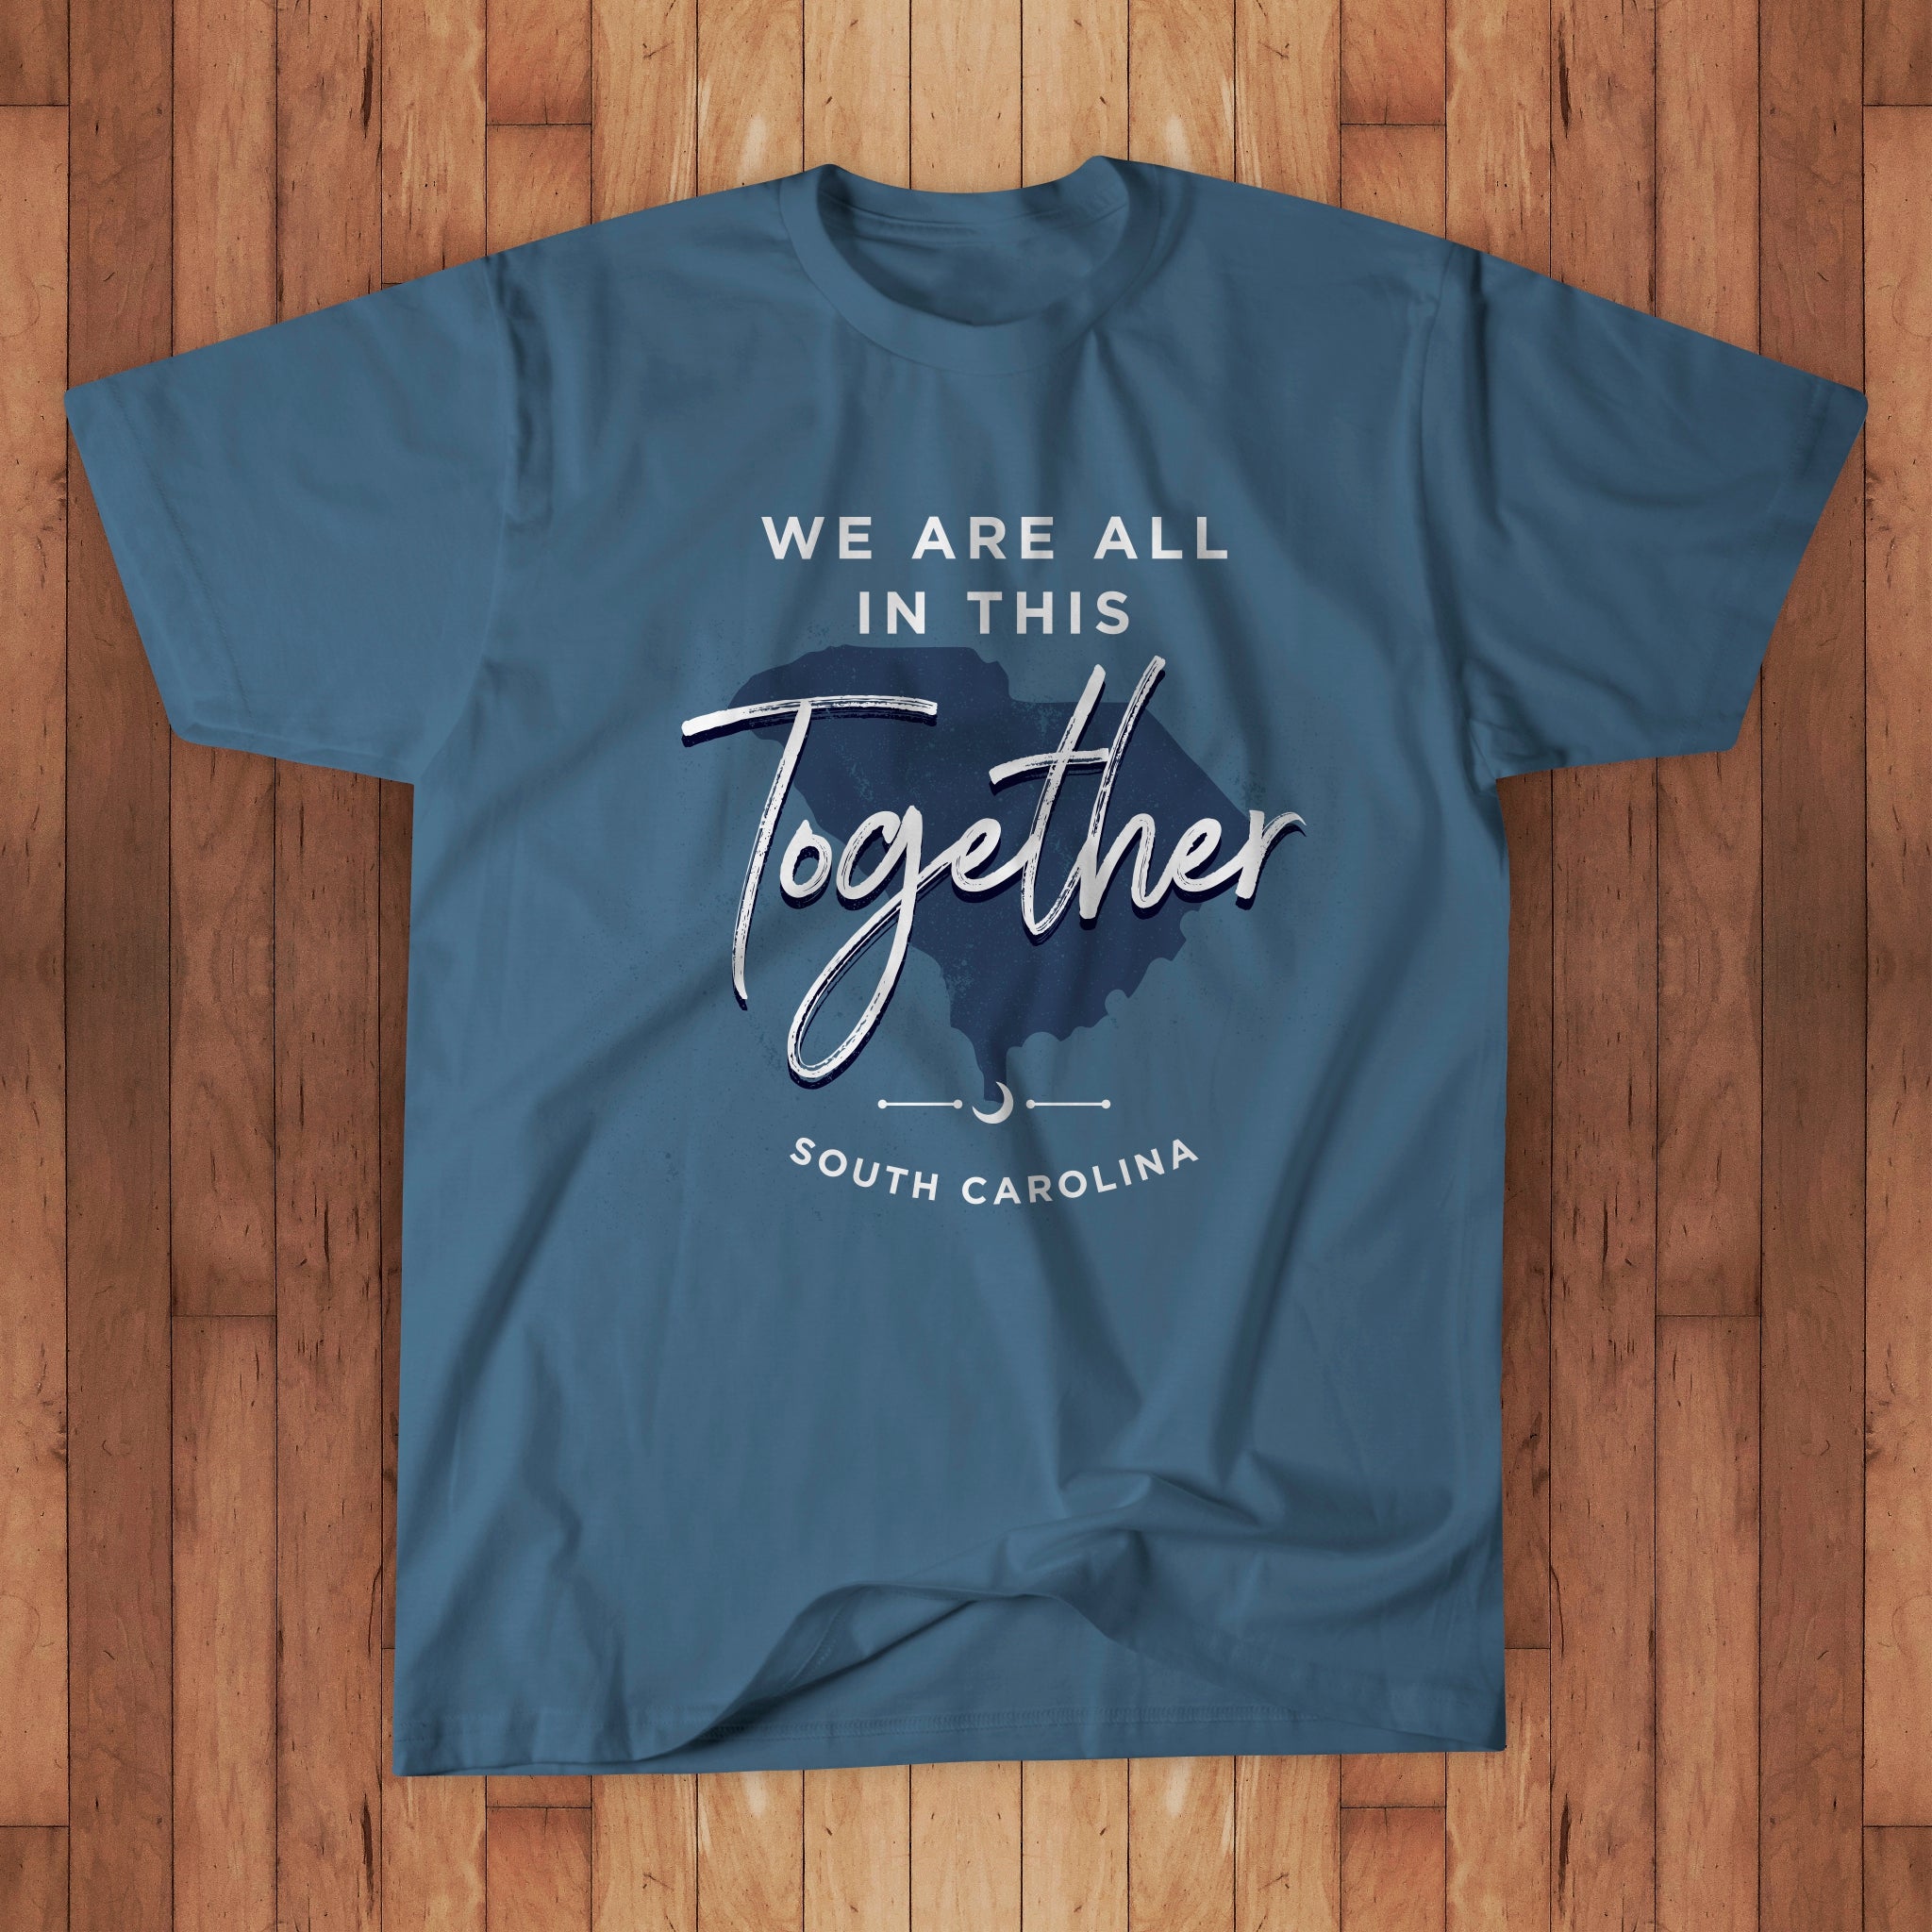 In this together t-shirt